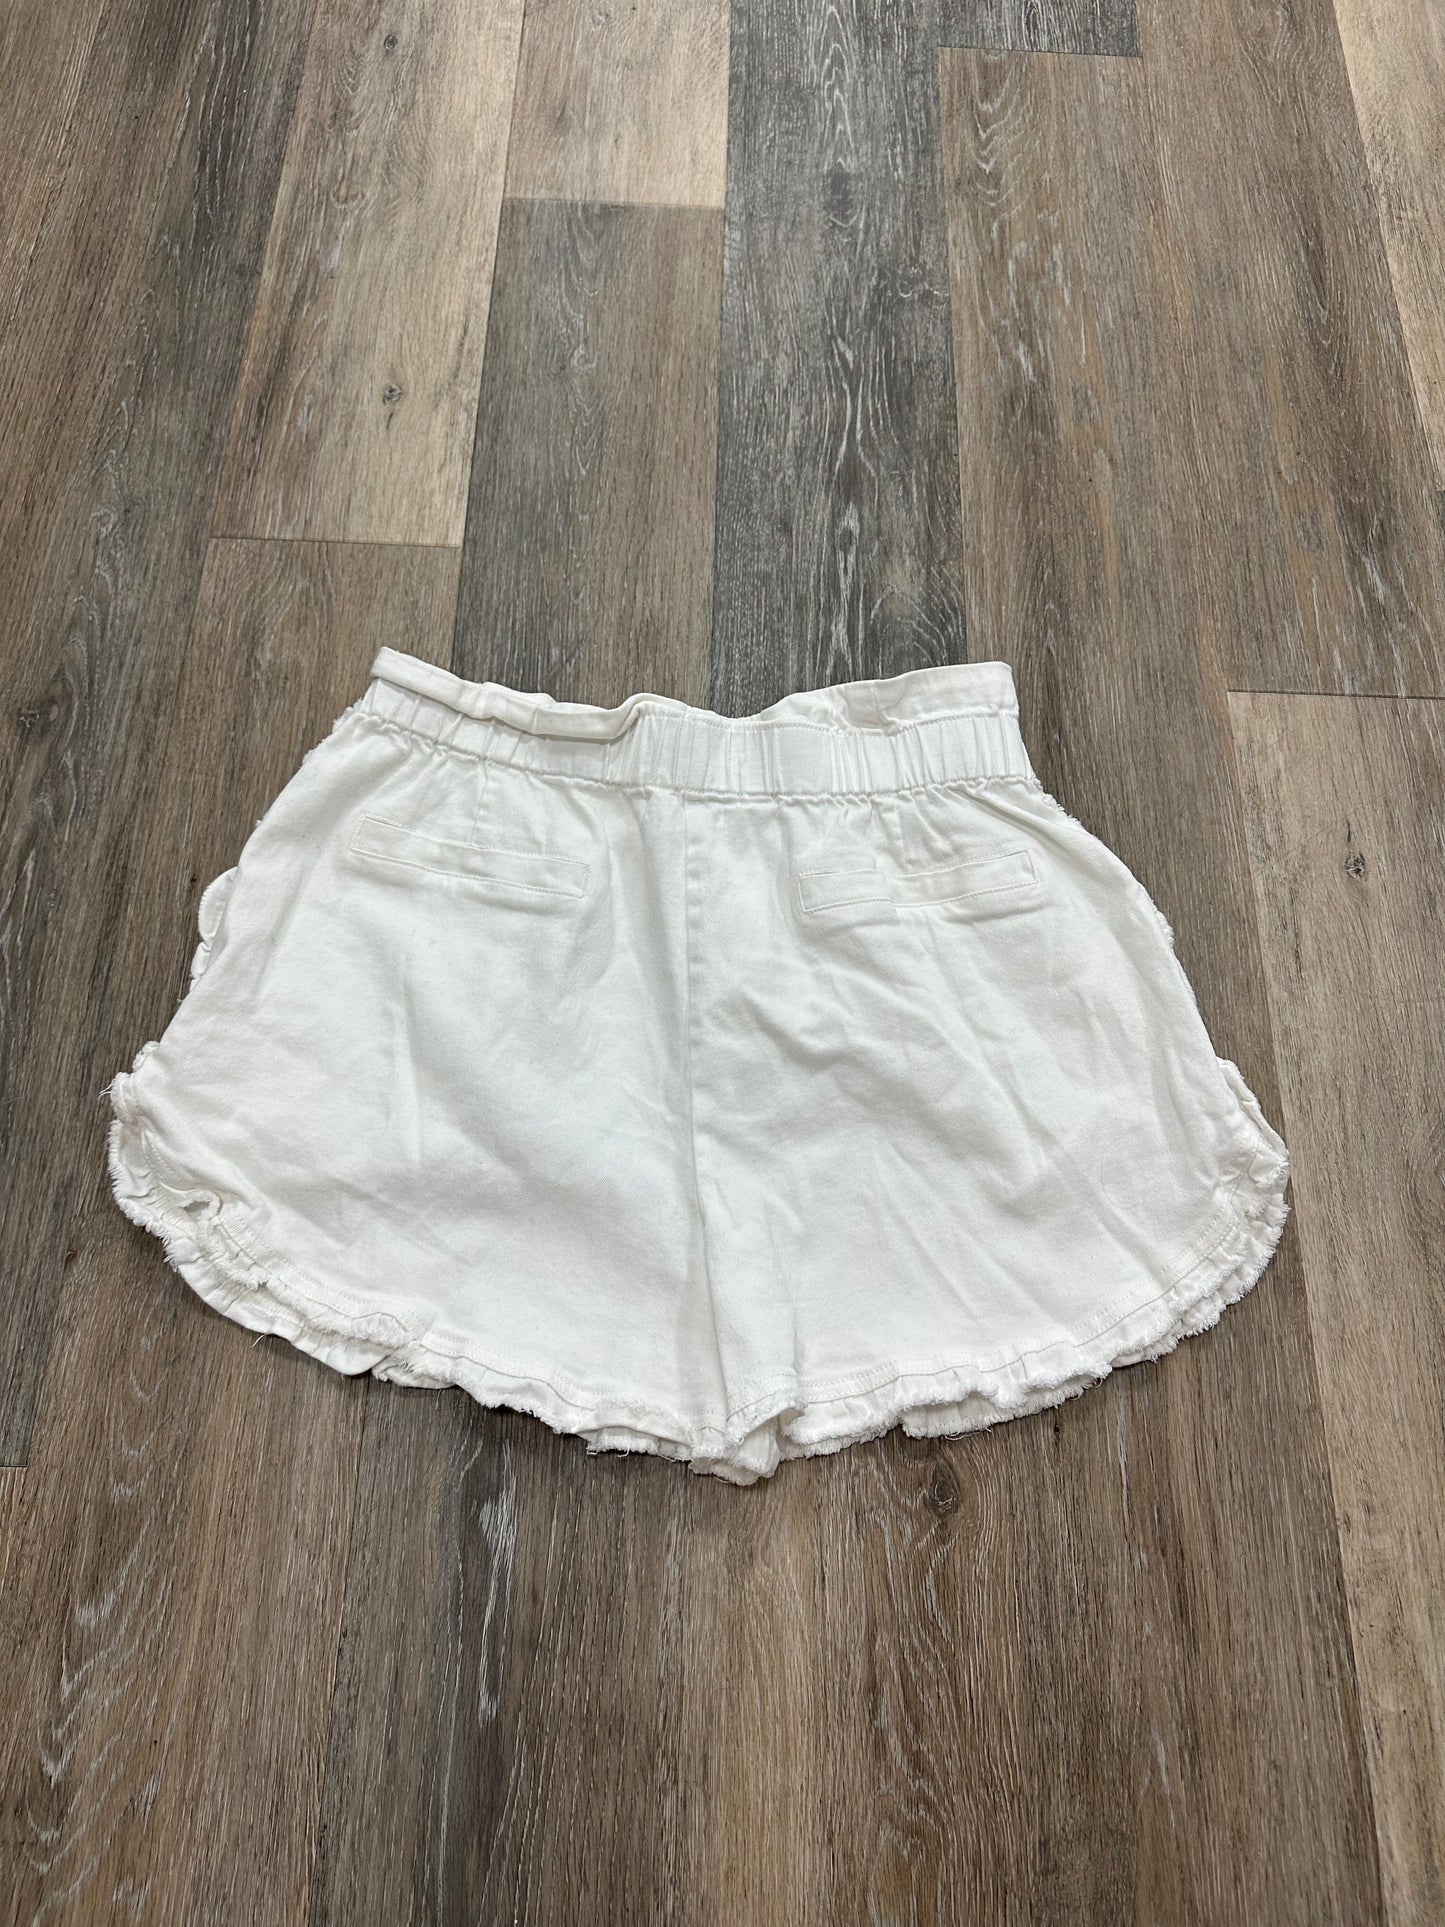 Shorts By The Nines  Size: L